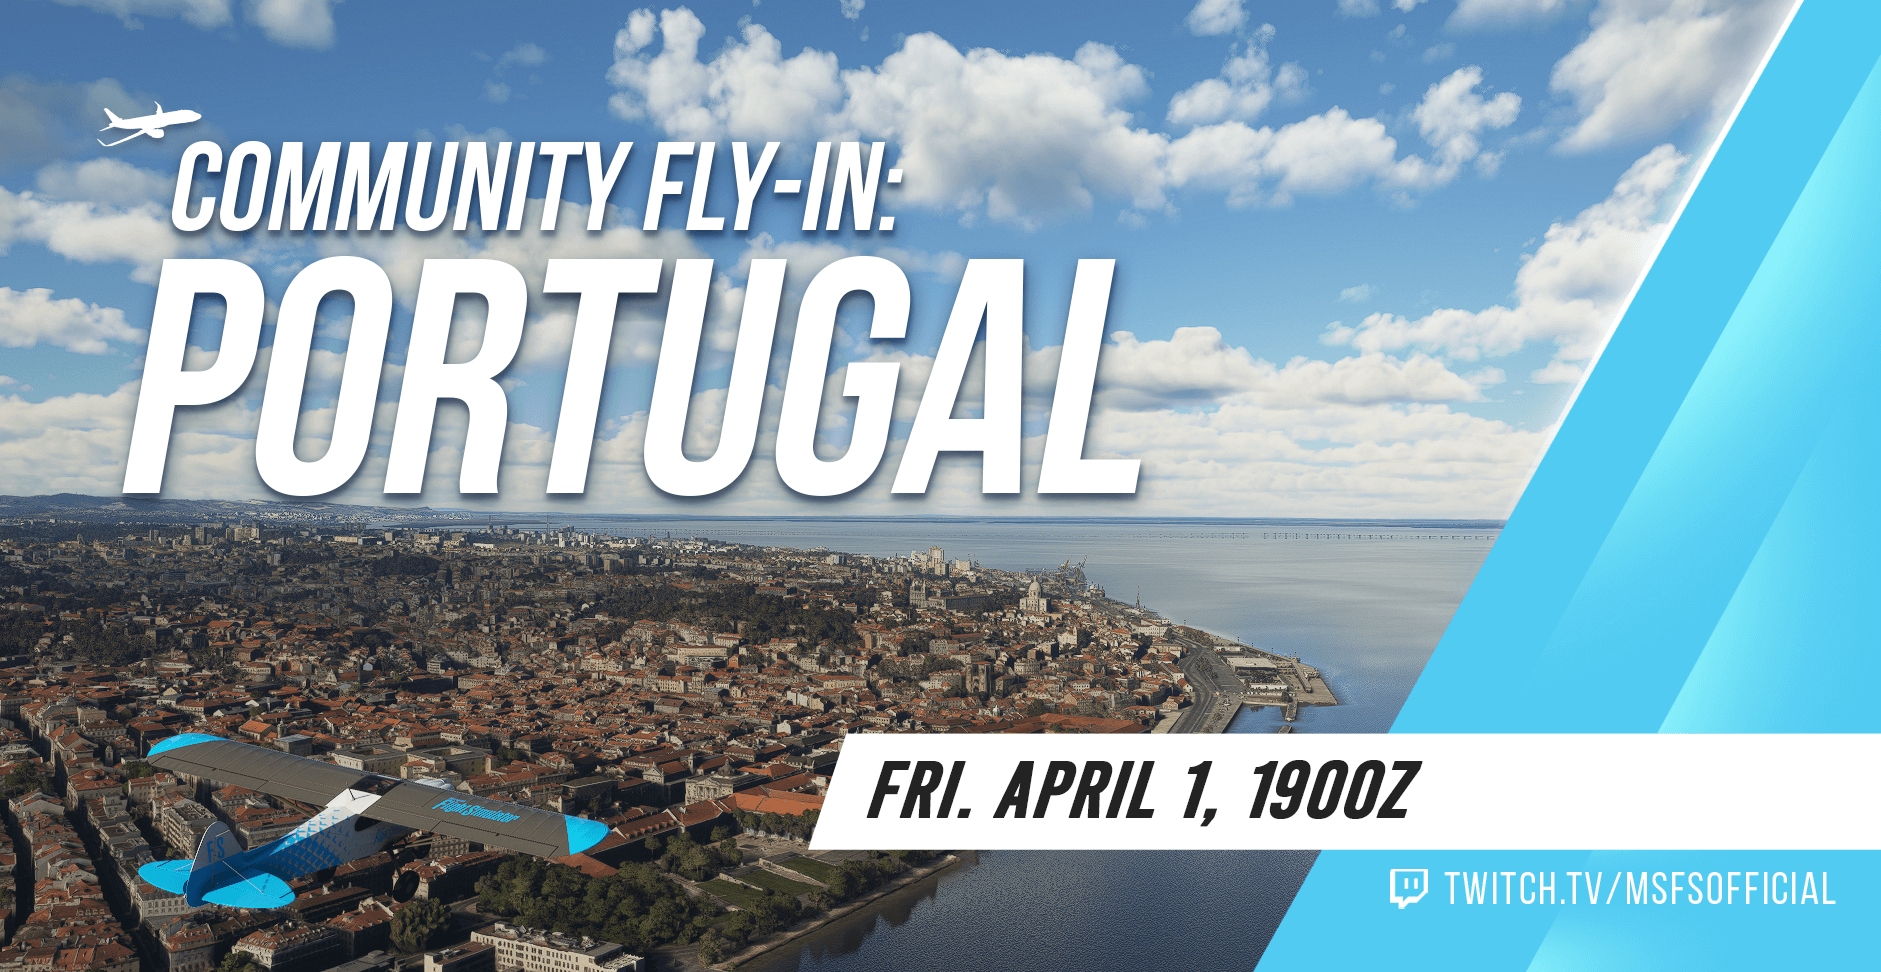 Community Fly-In: Portugal. Starting on Friday April 1st at 1900Z.